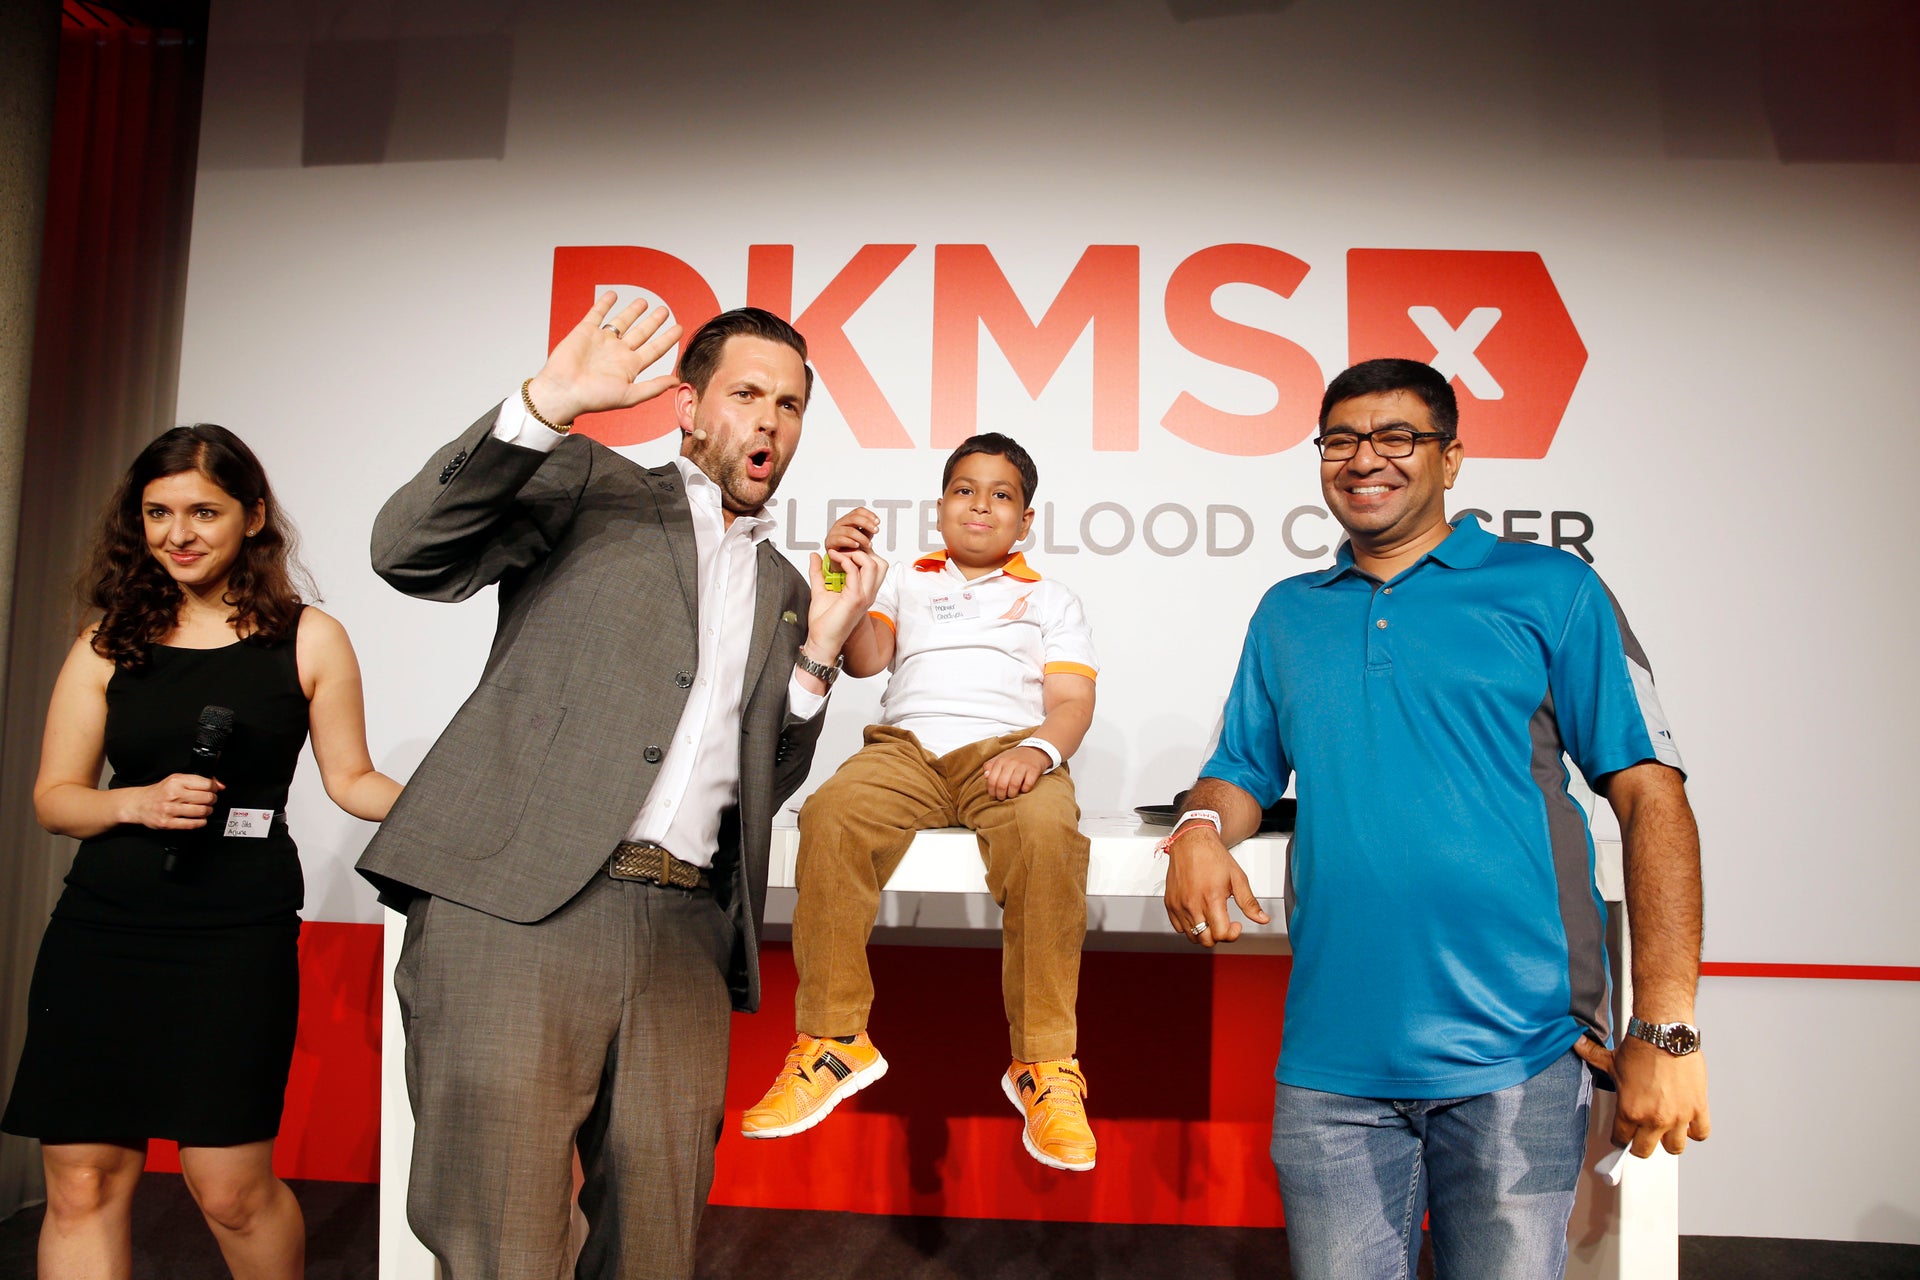 Four people in front of the DKMS logo smiling and cheering